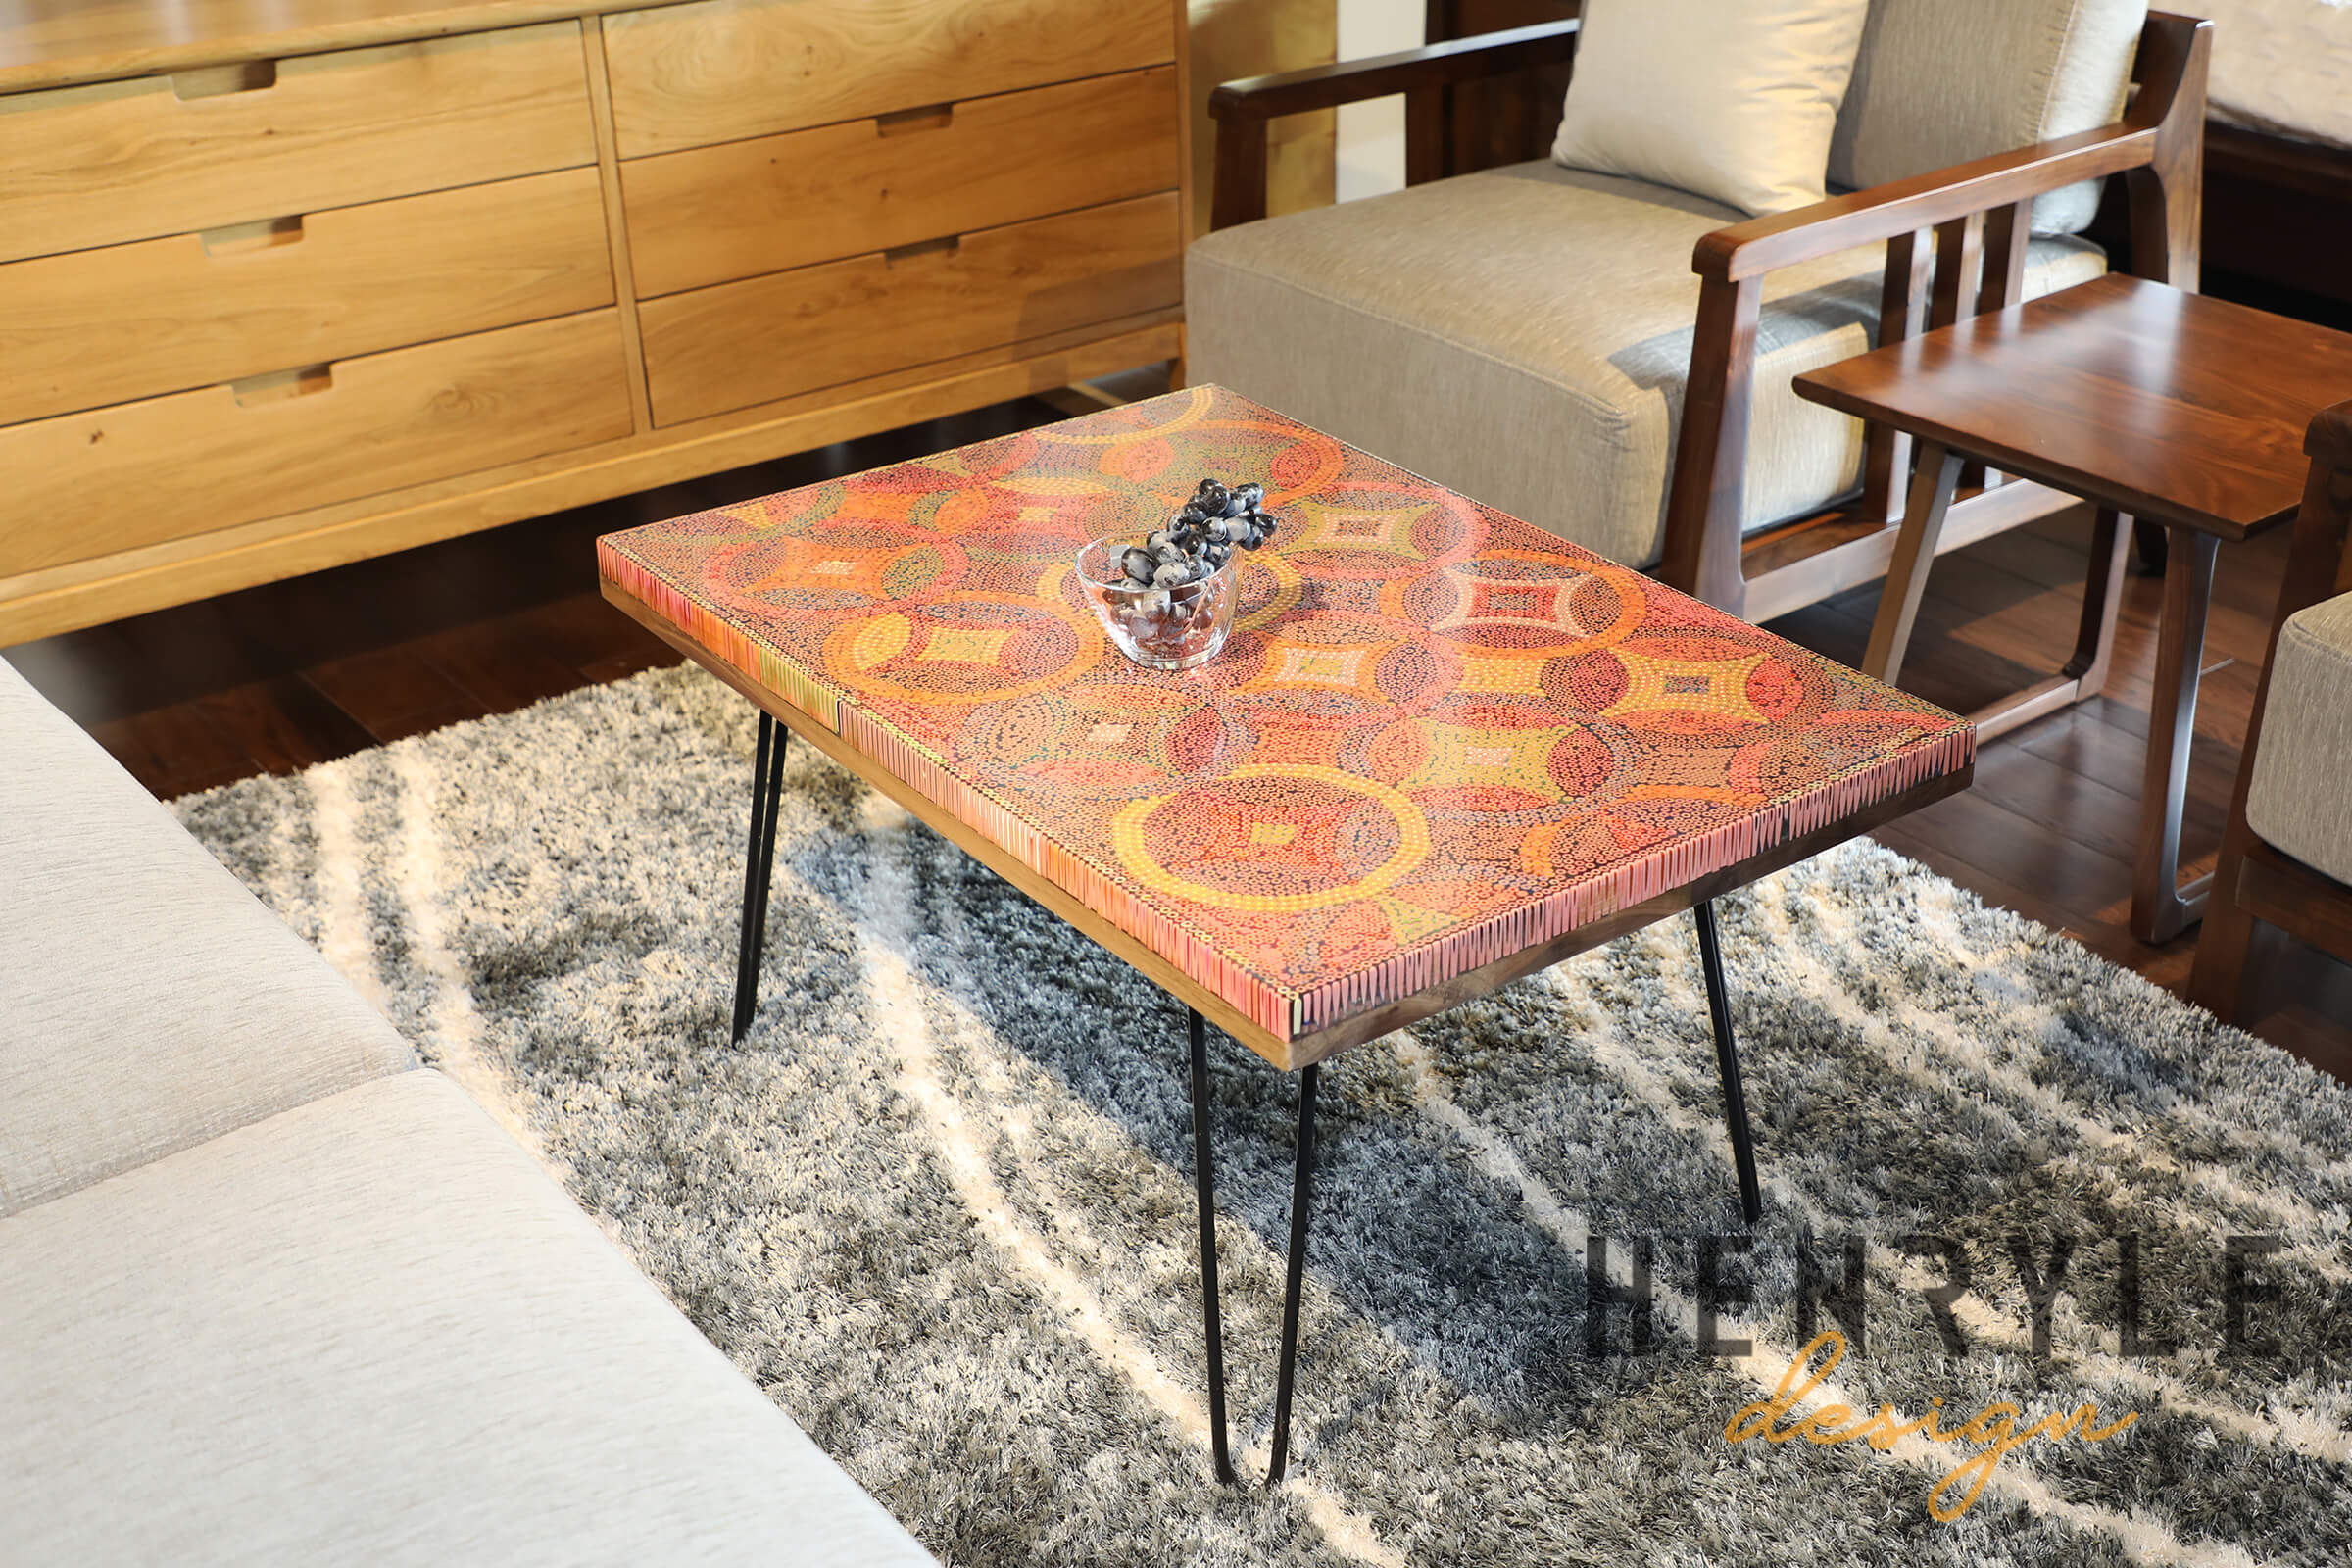 Starry Night Colored-Pencil Coffee Table